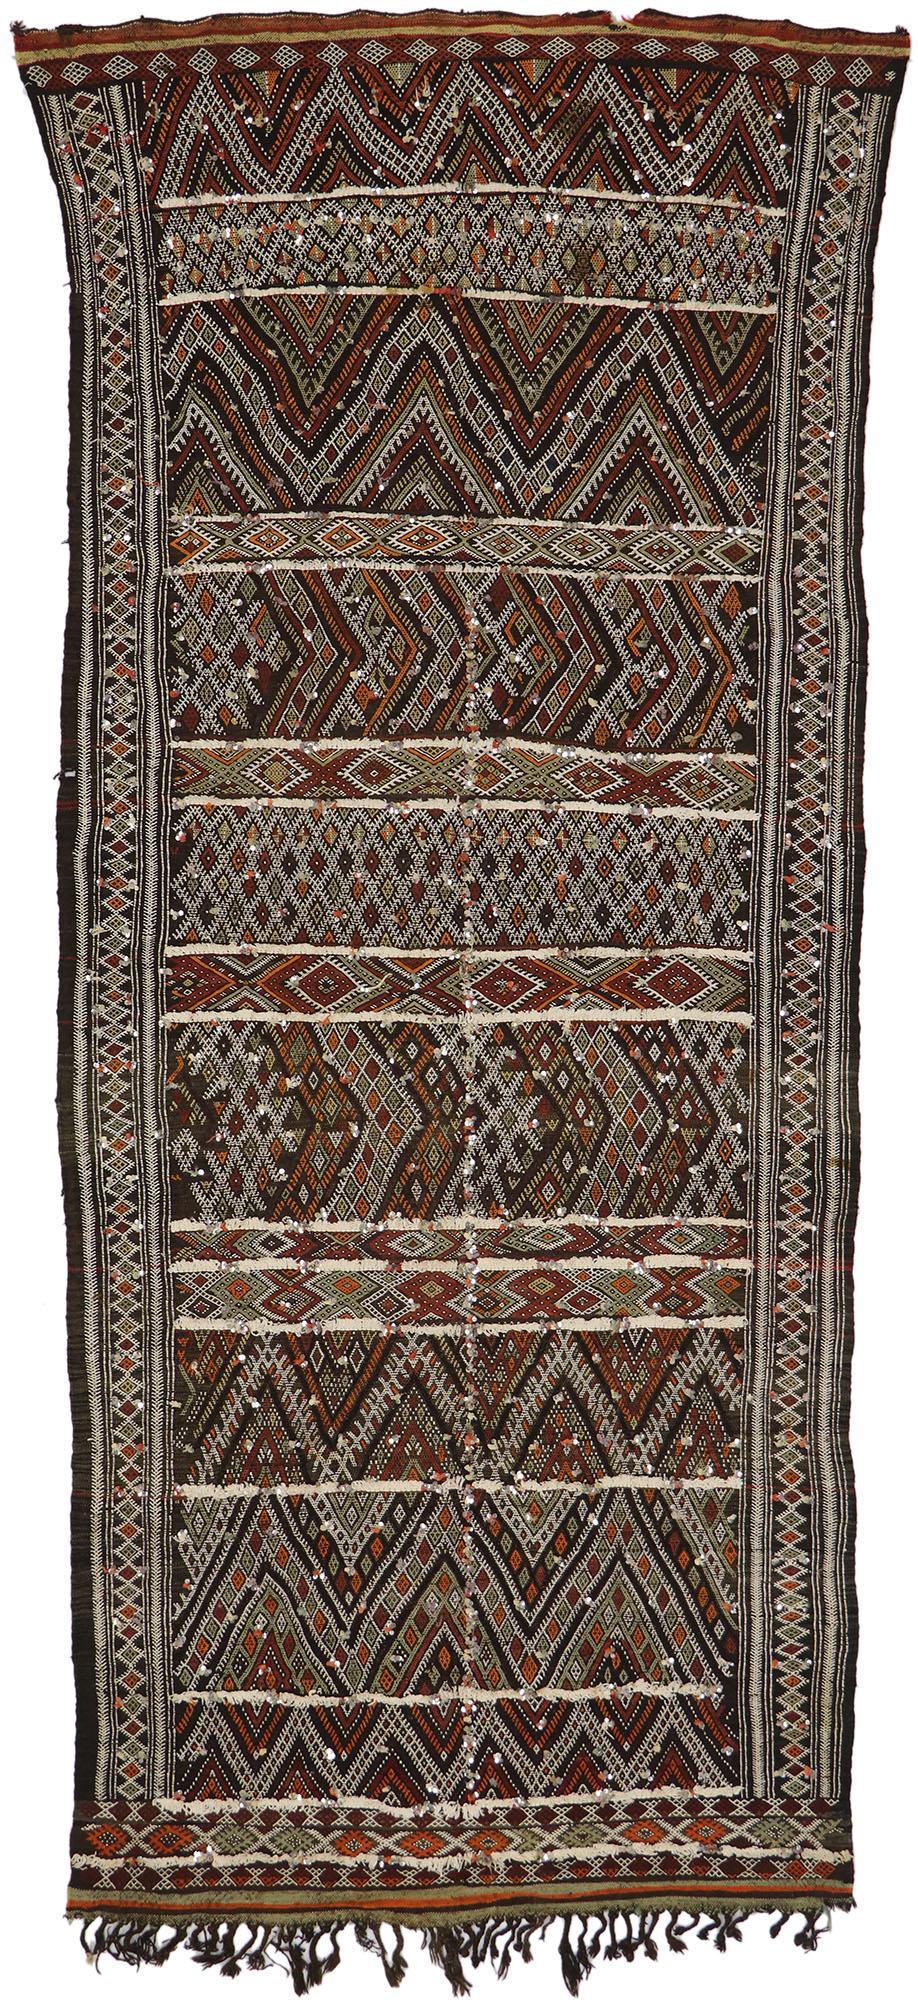 Vintage Zemmour Moroccan Kilim Runner with Sequins and Tribal Boho Chic Style For Sale 4